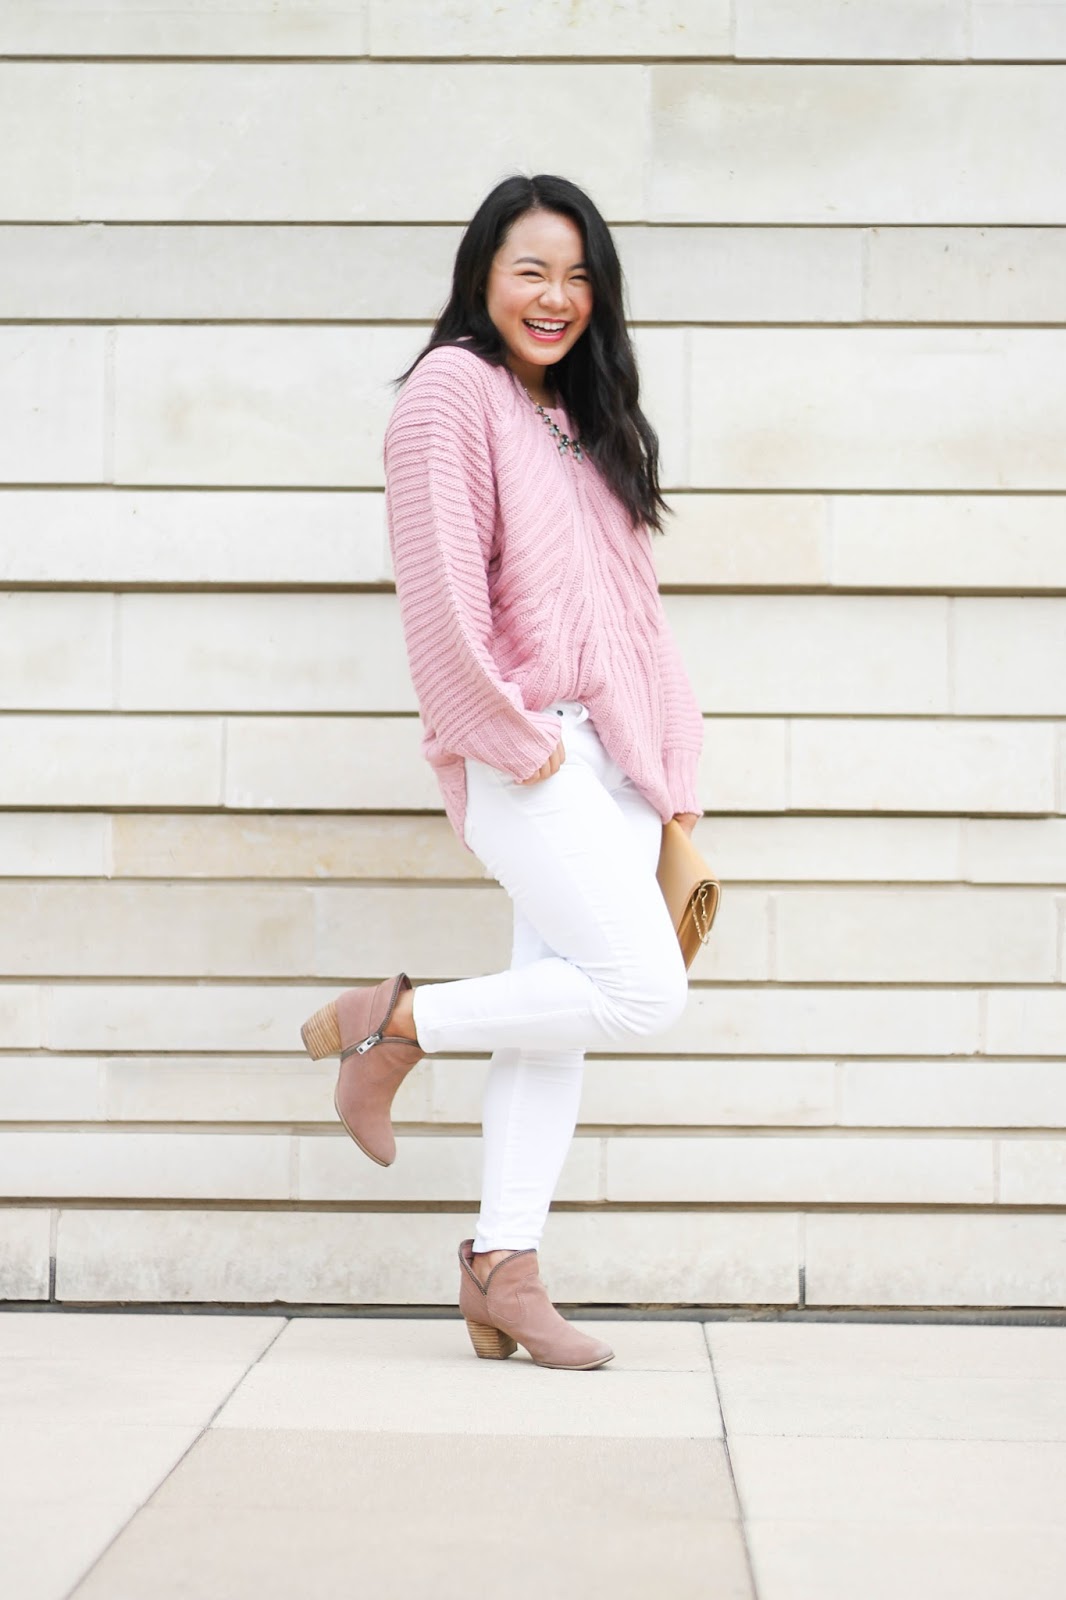 The Coziest Pink Sweater | The Bella Insider